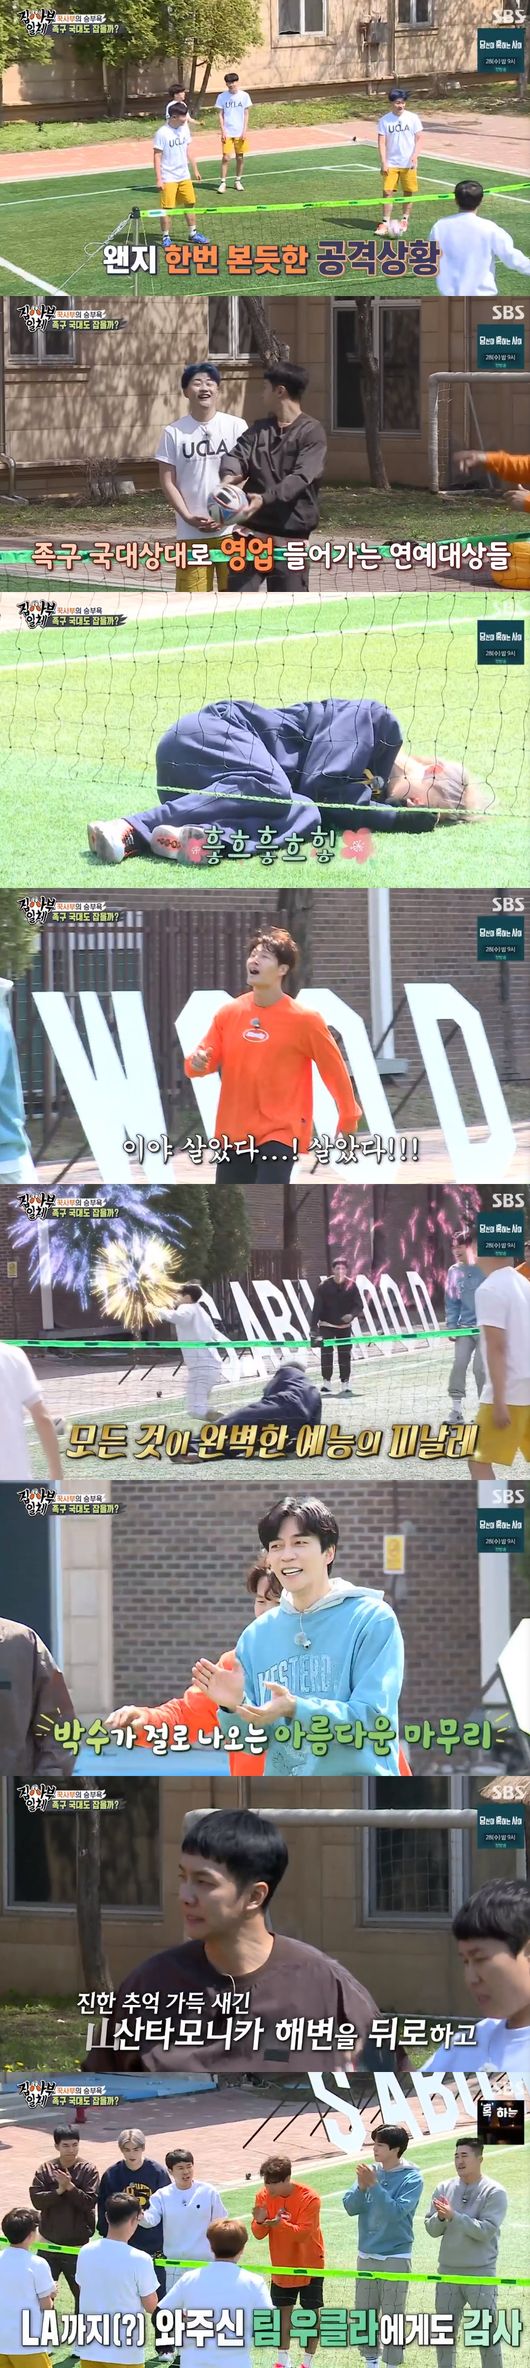 In All The Butlers, Cha Eun-woo was forced to blush, and the confrontation of the game was a laughing matter.Kim Jong-kook appeared as a master in SBS entertainment All The Butlers broadcast on the 25th.Kim Jong-kook and Kim Dong-Hyuns shin wrestling rematch was held; the tight confrontation was expected, but Kim Dong-Hyun lost,I changed my foot again and challenged the other side, but in three seconds I was hit by K.O. The members said, The end is really strong. If you are like this, lets win if you are one of the last.Jung Eun-woo is likely to win the run, Jung Eun-woo said. I think it will be faster than muscle man, should I win a running man?Cha Eun-woo won by a step in the confrontation of the provocative and the under-the-top confrontation.At this time, UCLA players proposed Jokgu, each showing a check against each other, and the Ukla teams provoked with a specific score, saying, Can we win, we will win 15 to 12?Kim Jong-kook said, Lets not make such a mistake, I will win this way. Do not be greedy, do not try to be a hero.After all, the repressed fight-off was sealed, and Kim Jong-kook went into the game himself, chasing closely from 15-point match to 12-11.Kim Jong-kook made a mistake in all expectations, and Kim Jong-kook made a mistake to Kim Dong-Hyun next to him, saying, I care because you are screaming.Kim Dong-Hyun said, Why do you blame others? Yang Se-hyeong also laughed, saying, My brother is not just a temper, this is my brothers fault.Kim Jong-kook interviewed Yang Se-hyeong separately and laughed when he said, You should support me.With only one point match left, the Ukla team suddenly showed off their skills and showed extraordinary skills.It turns out that Jokgu was a national player, and it was not a provocation but a score control.Kim Jong-kook laughed at the suggestion of a golden goal on the spot, Yang Se-hyeong and Lee Seung-gi also made a proposal that would make the face hot.Cha Eun-woo, behind him, was embarrassed, saying, Do you have such a Jokgu team, notmanner?Eventually, he repositioned his position in the same situation, and Cha Eun-woo became the ending fairy and made the finale, a finish that was enough to applaud.Everything is perfect entertainment, its fun, he said, thank you Jung Eun-woo came out thanks to you.All The Butlers broadcast screen capture